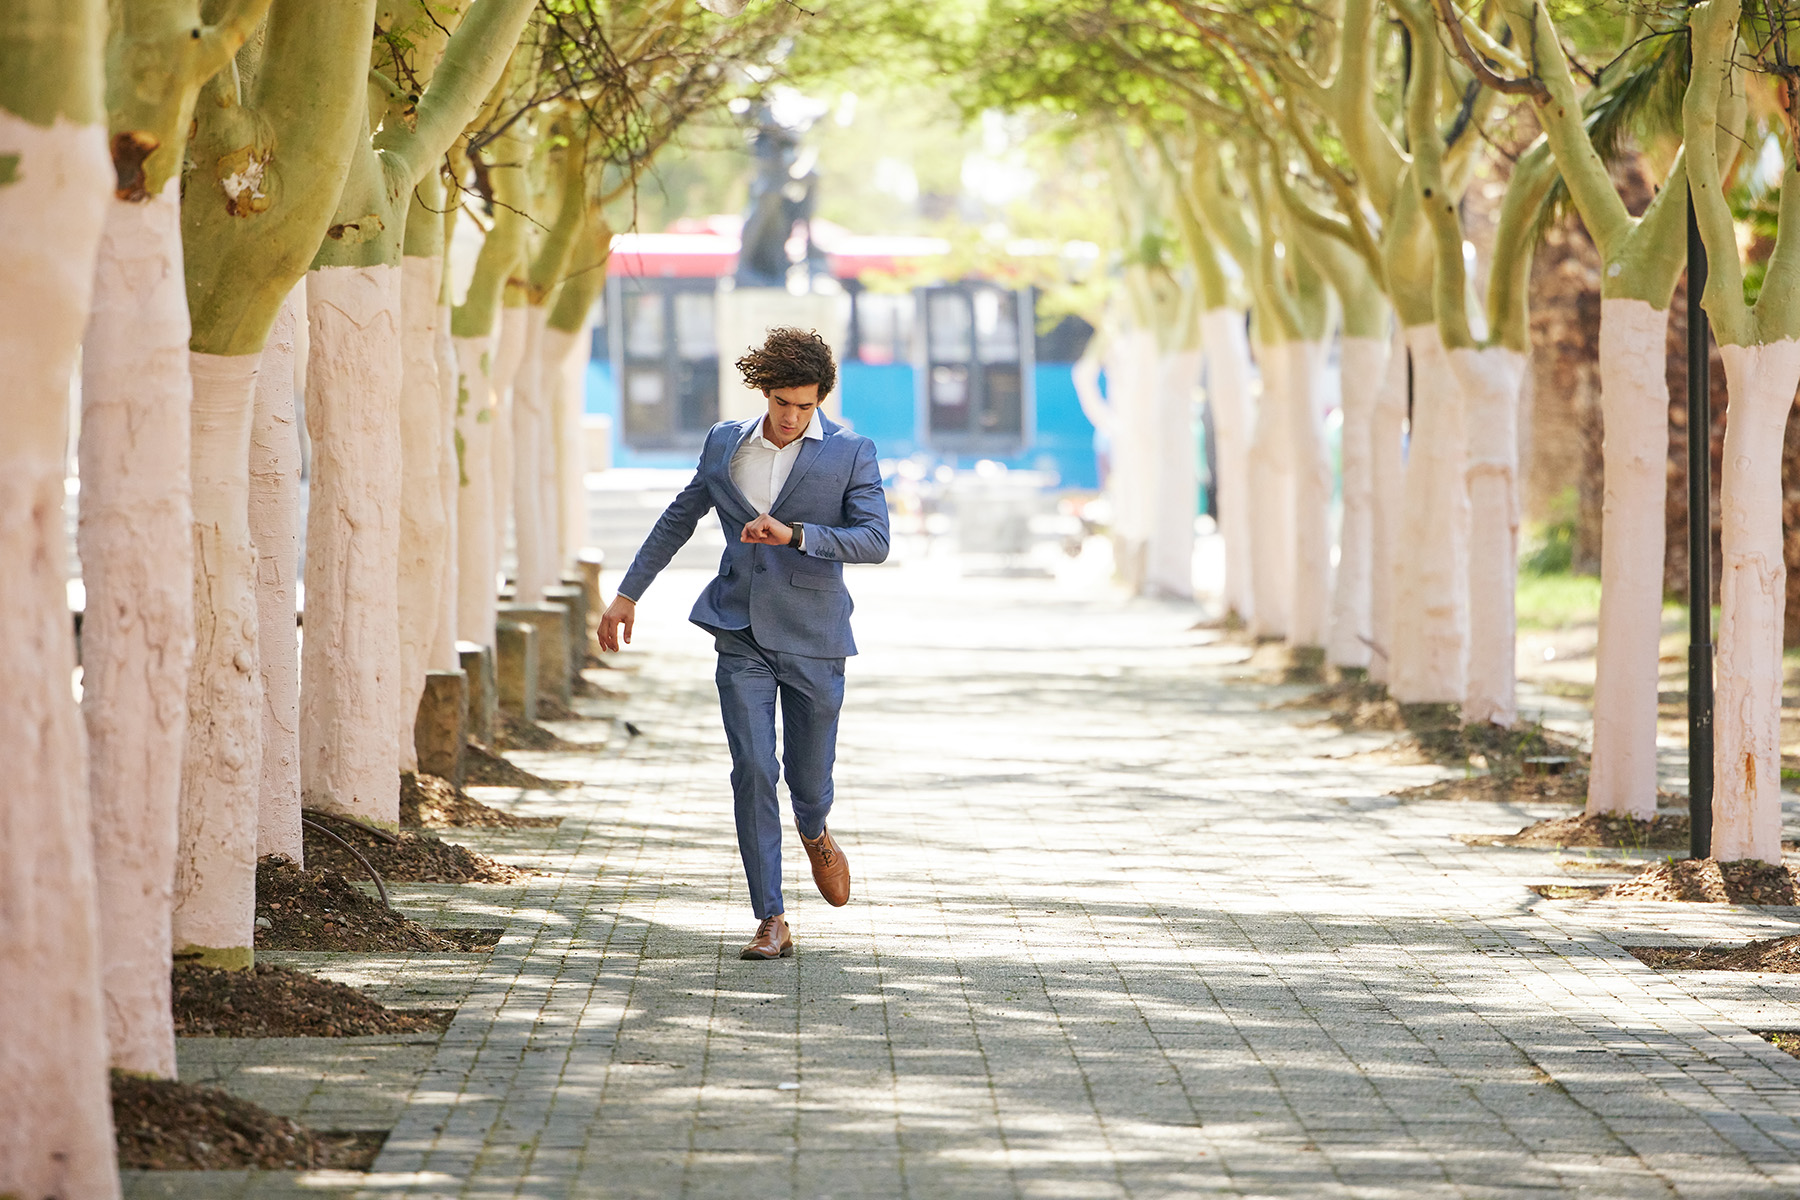 Young man in formal wear running down a lane with trees while looking at his watch. He's late for something.